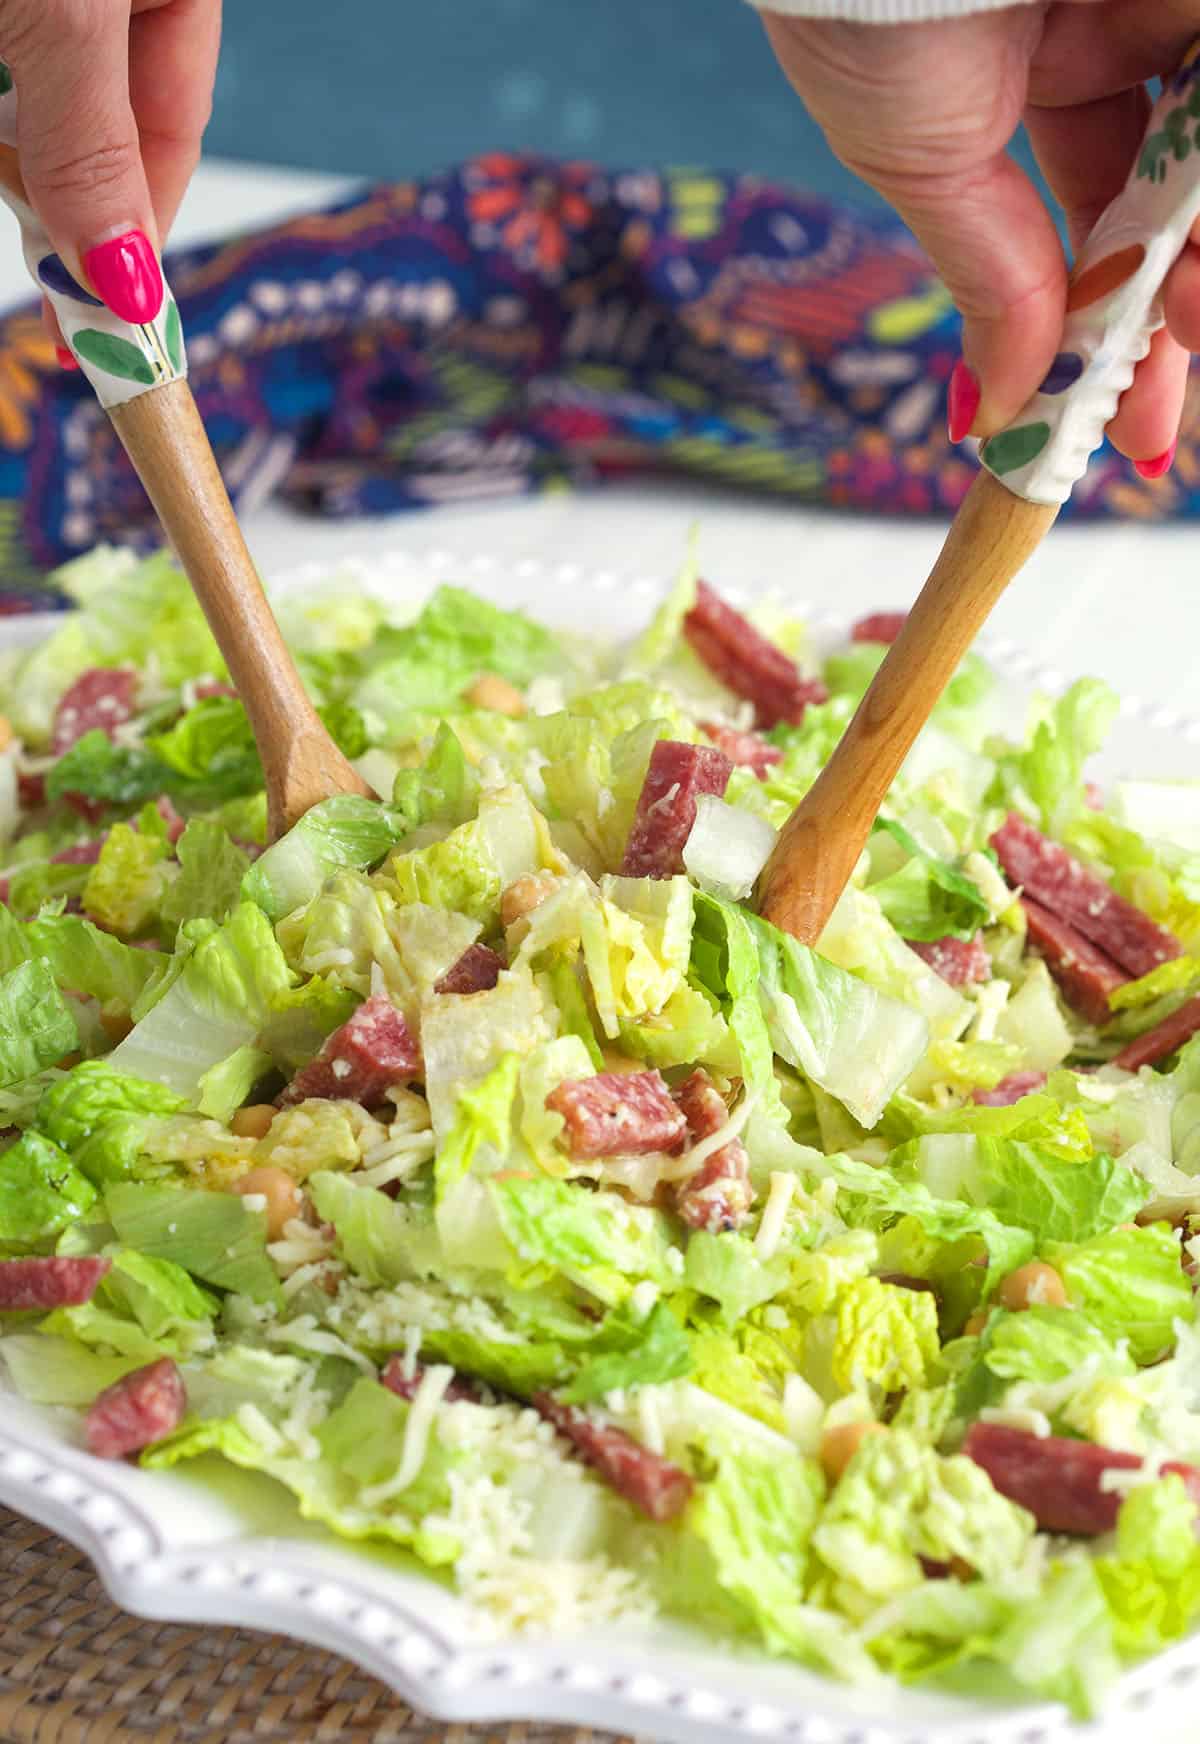 Salad is being tossed with wooden utensils. 